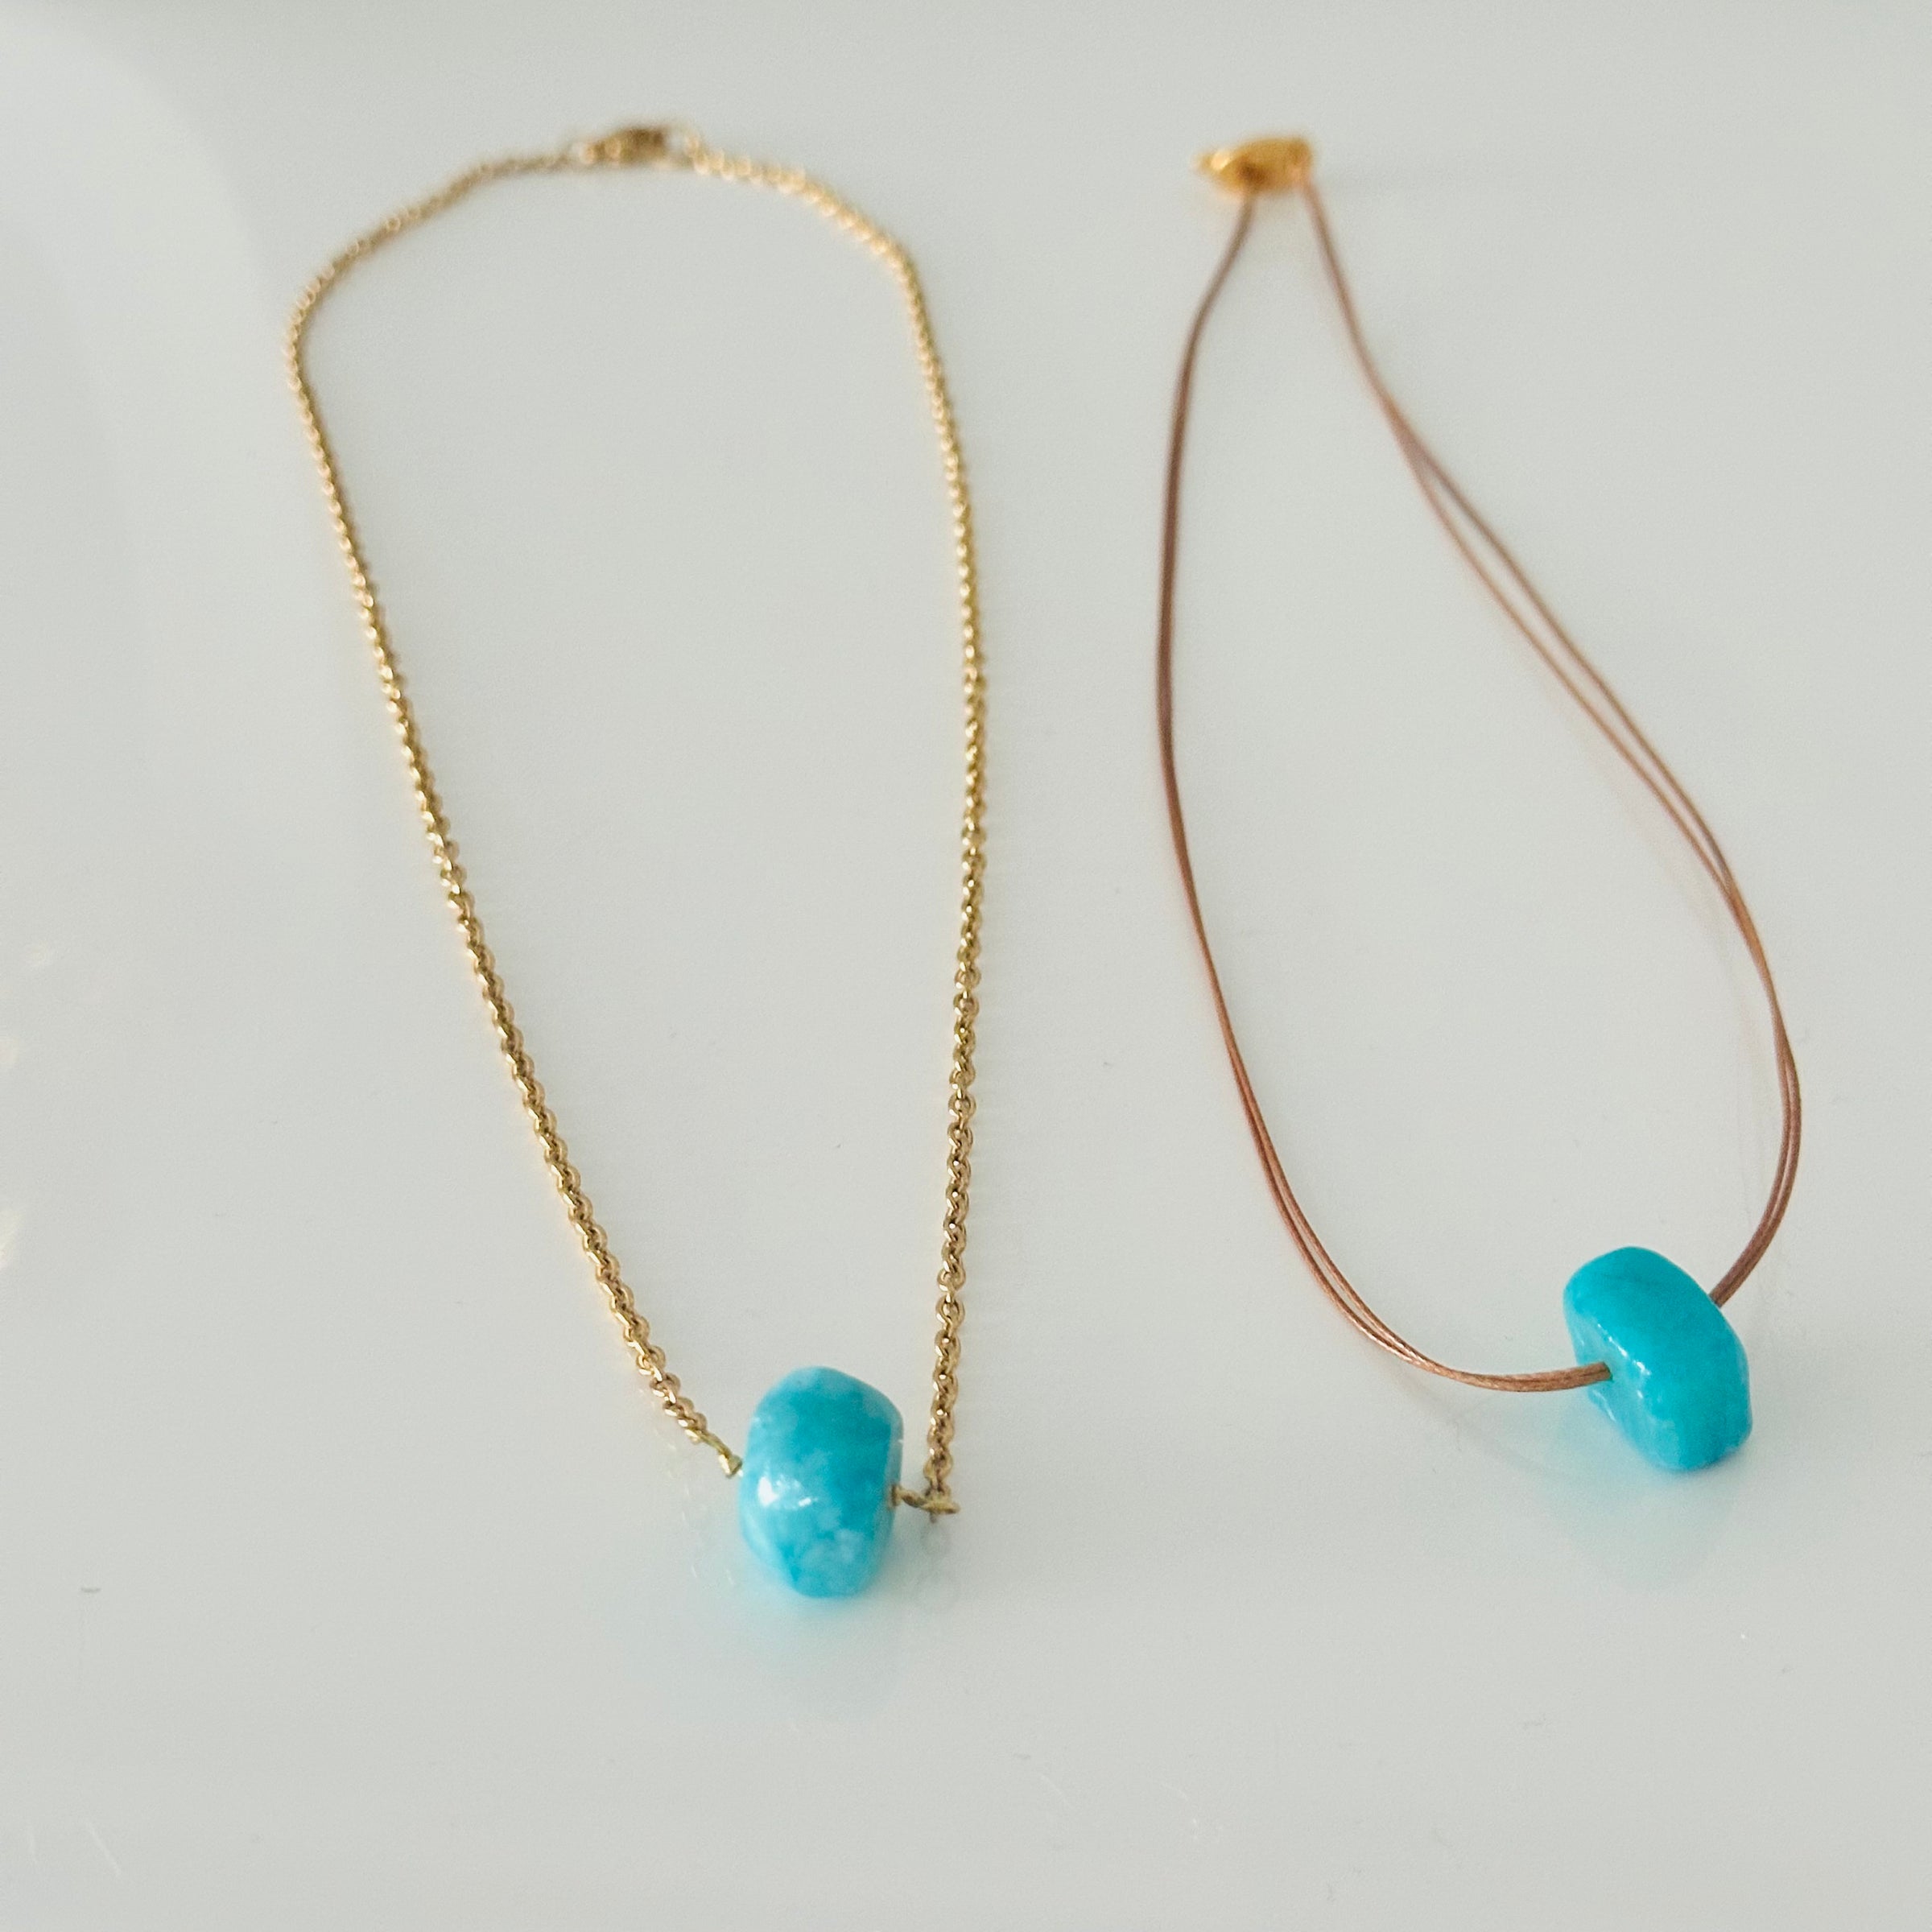 Single Blue Bead Necklace With Chain